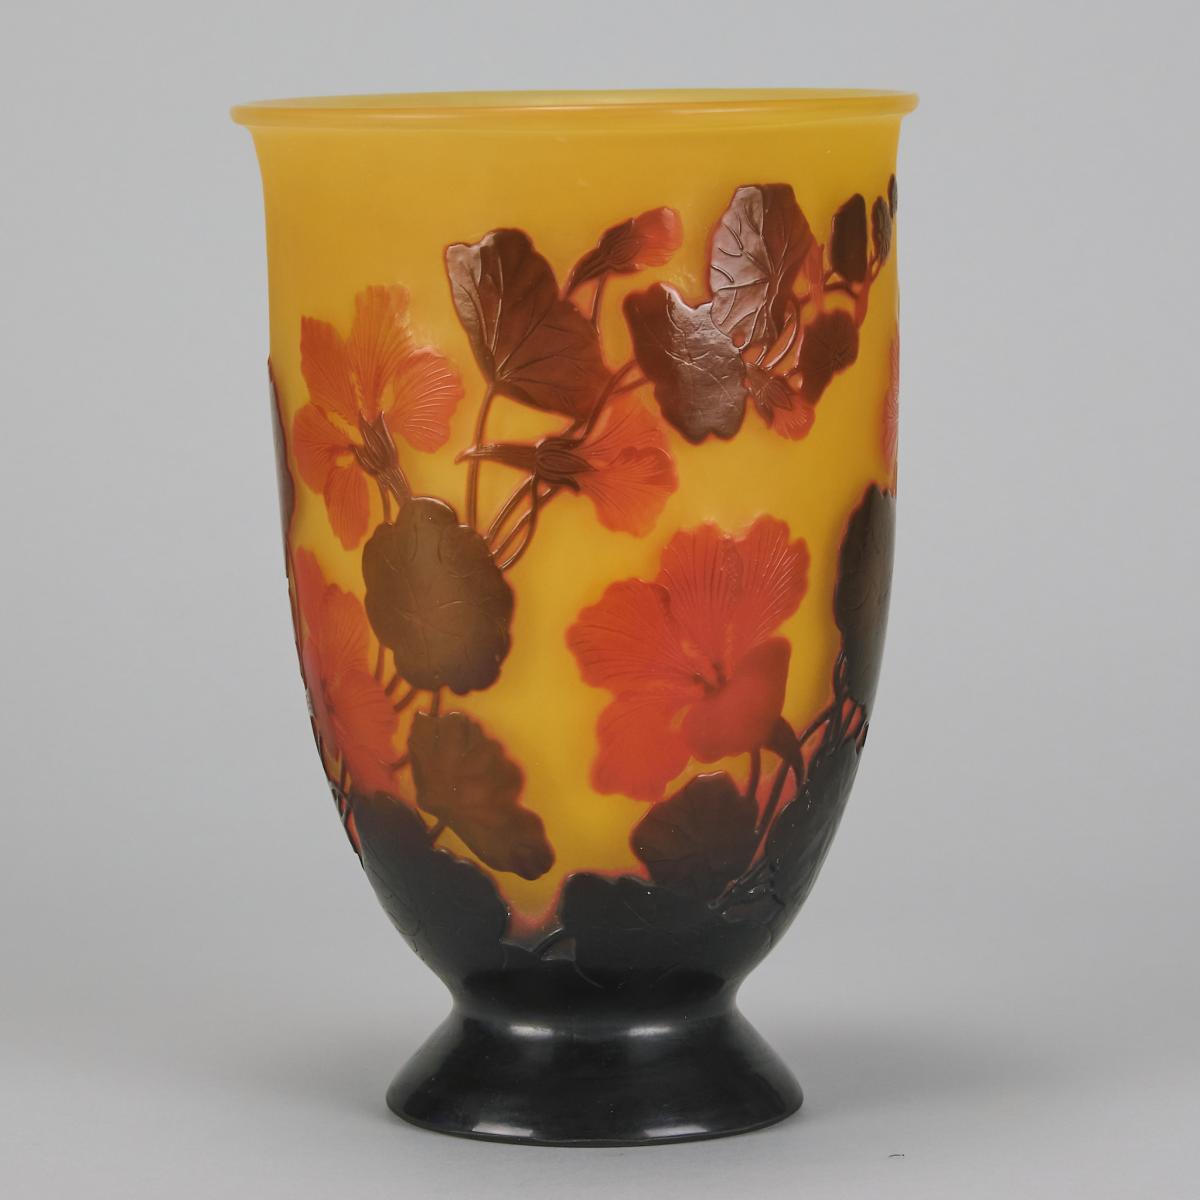 Early 20th Century Cameo Glass Vase Entitled "Floral Vase" by Emile Gallé